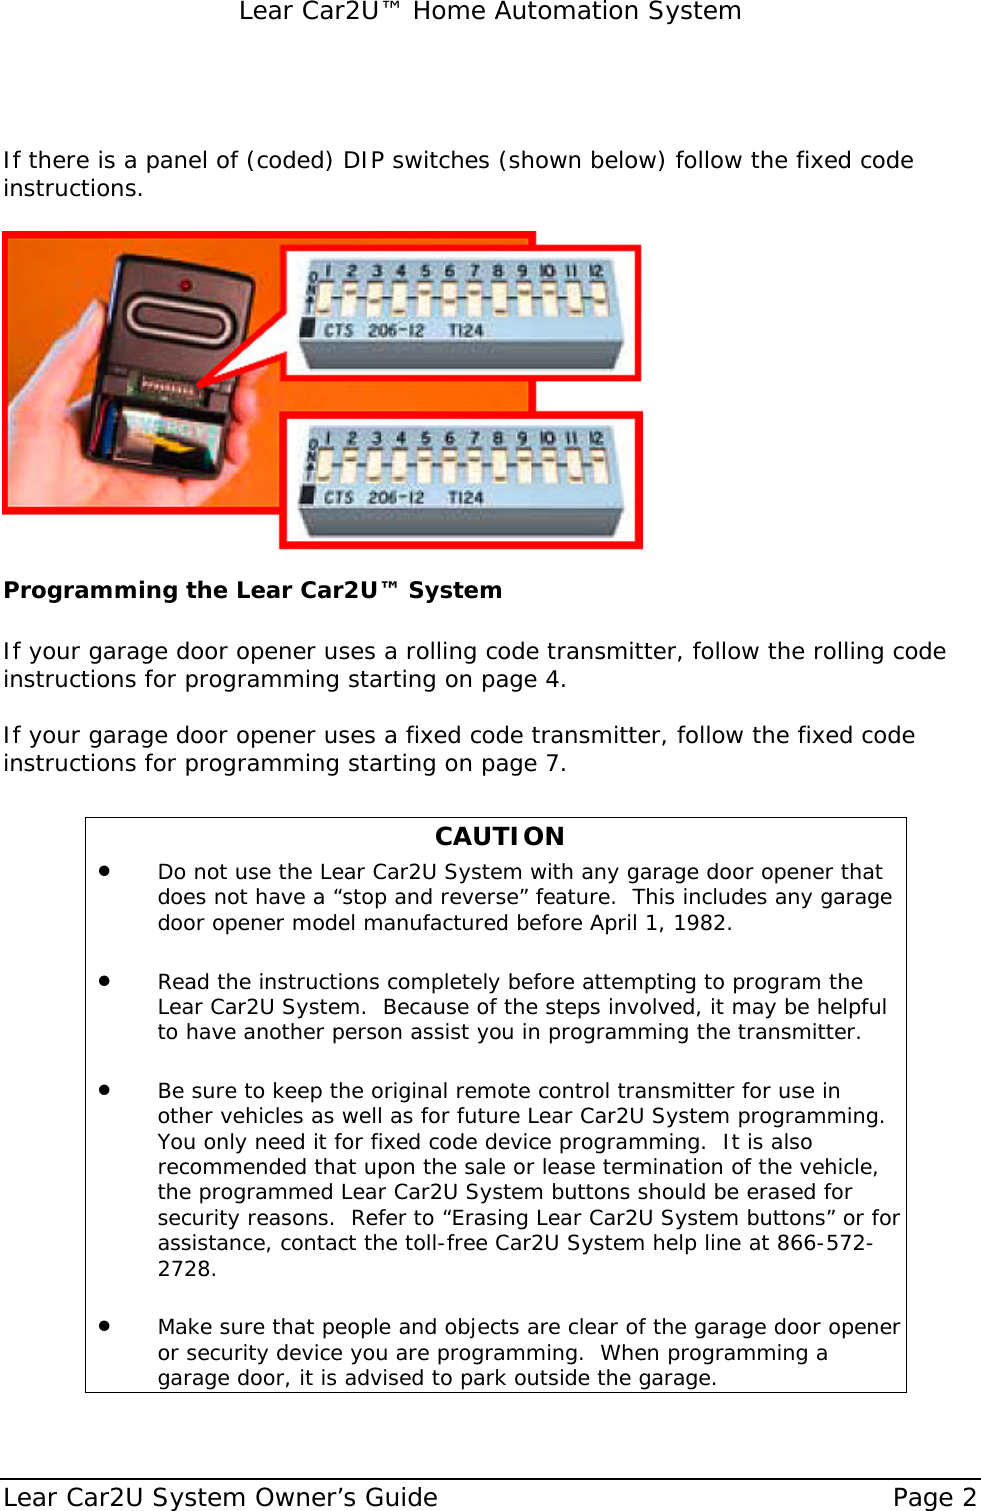   Lear Car2U™ Home Automation System Lear Car2U System Owner’s Guide    Page 2     If there is a panel of (coded) DIP switches (shown below) follow the fixed code instructions.   Programming the Lear Car2U™ System   If your garage door opener uses a rolling code transmitter, follow the rolling code instructions for programming starting on page 4.  If your garage door opener uses a fixed code transmitter, follow the fixed code instructions for programming starting on page 7.   CAUTION • Do not use the Lear Car2U System with any garage door opener that does not have a “stop and reverse” feature.  This includes any garage door opener model manufactured before April 1, 1982.    • Read the instructions completely before attempting to program the Lear Car2U System.  Because of the steps involved, it may be helpful to have another person assist you in programming the transmitter.  • Be sure to keep the original remote control transmitter for use in other vehicles as well as for future Lear Car2U System programming.  You only need it for fixed code device programming.  It is also recommended that upon the sale or lease termination of the vehicle, the programmed Lear Car2U System buttons should be erased for security reasons.  Refer to “Erasing Lear Car2U System buttons” or for assistance, contact the toll-free Car2U System help line at 866-572-2728.  • Make sure that people and objects are clear of the garage door opener or security device you are programming.  When programming a garage door, it is advised to park outside the garage.  